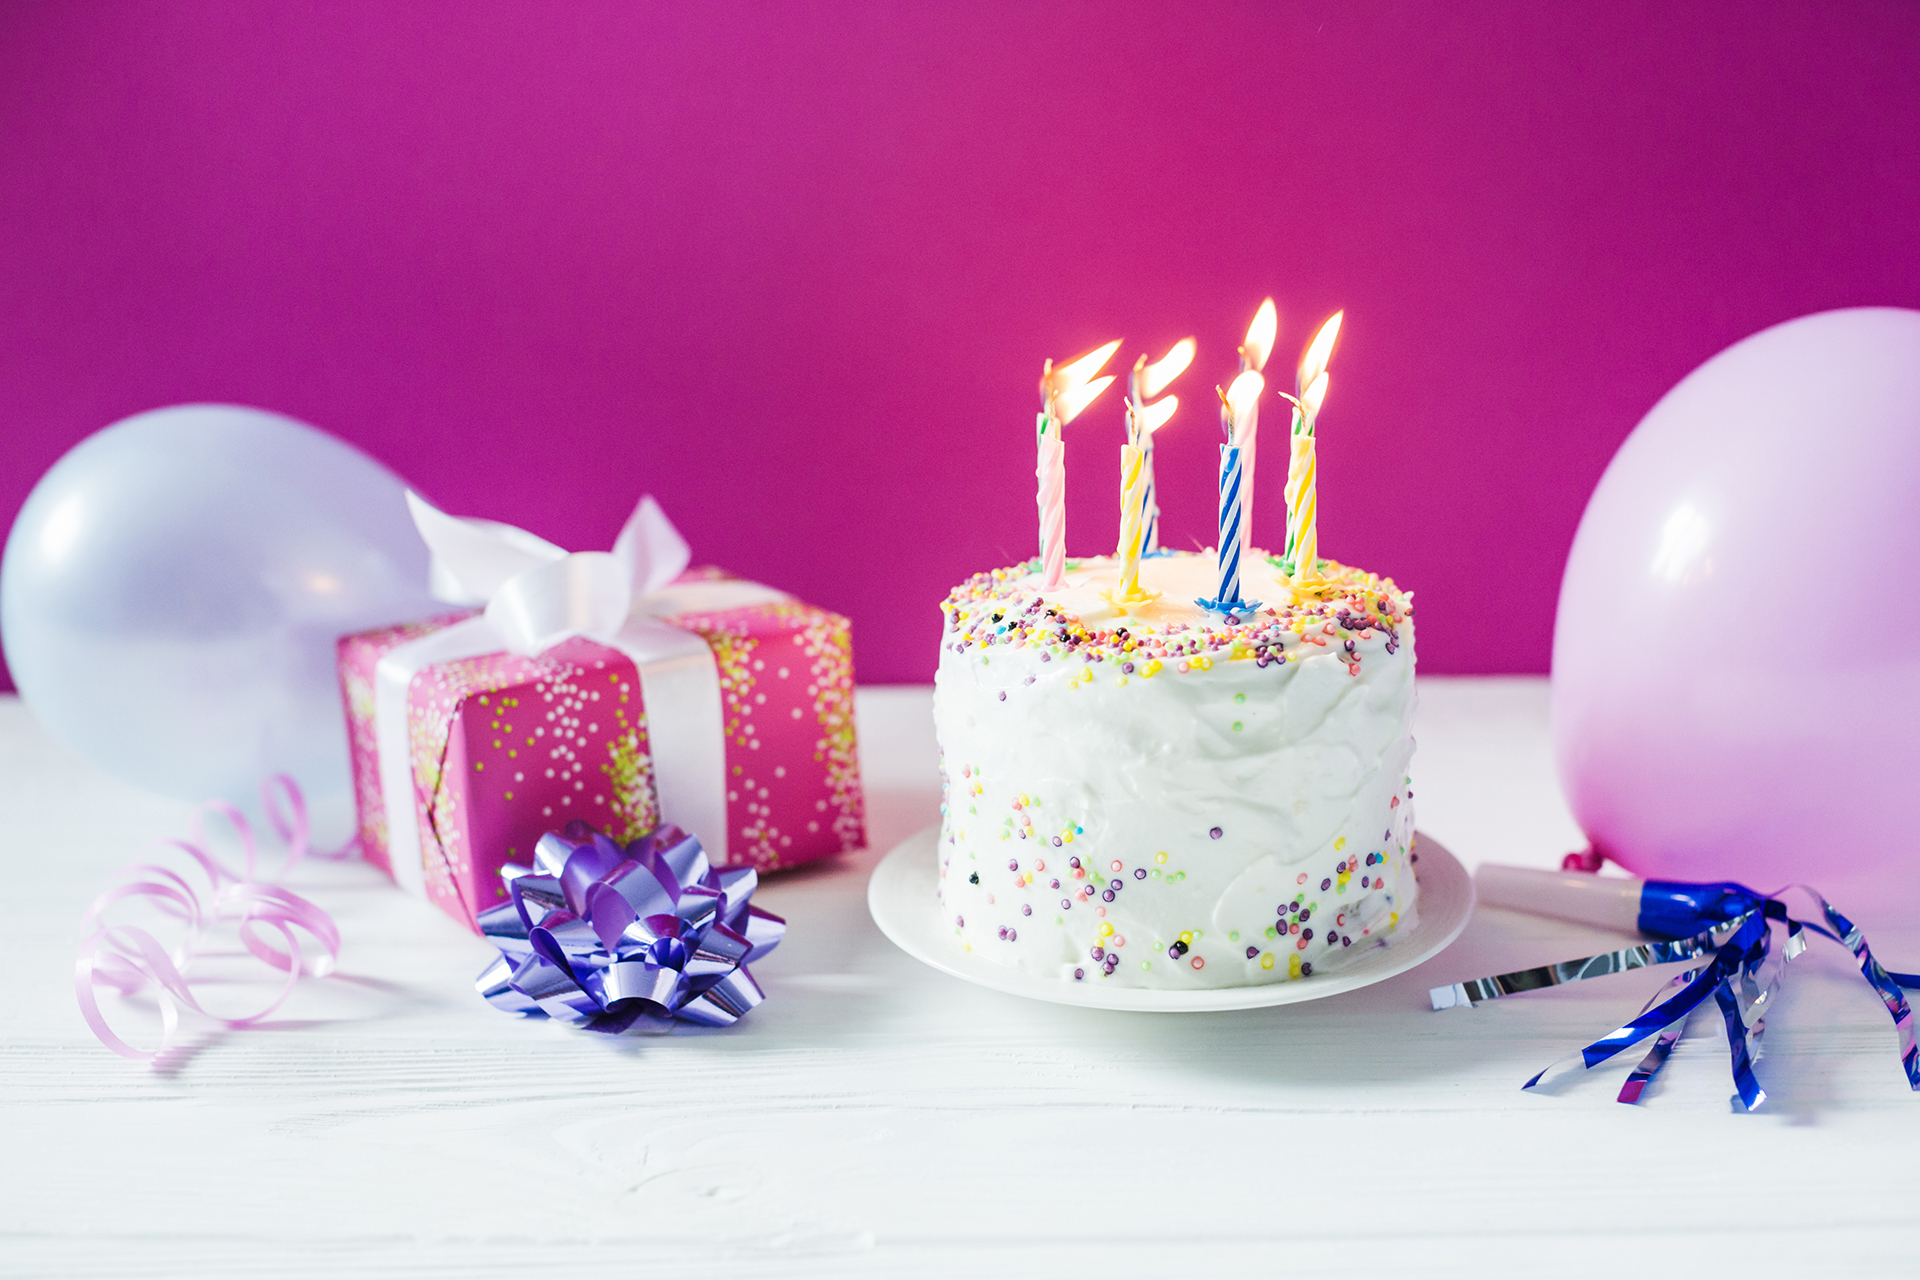 Collection of the most beautiful happy birthday wallpapers 2021